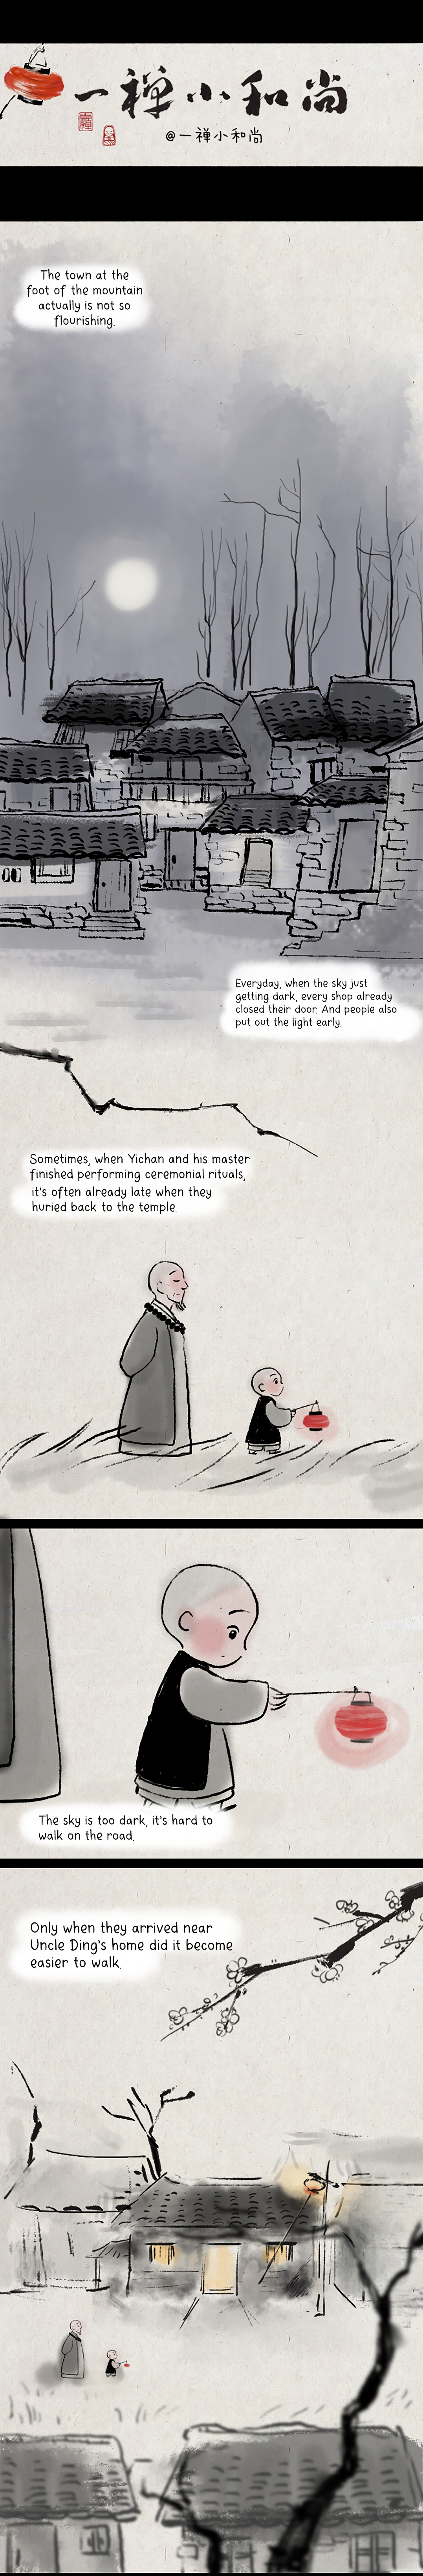 Yichan: The Little Monk - Page 1